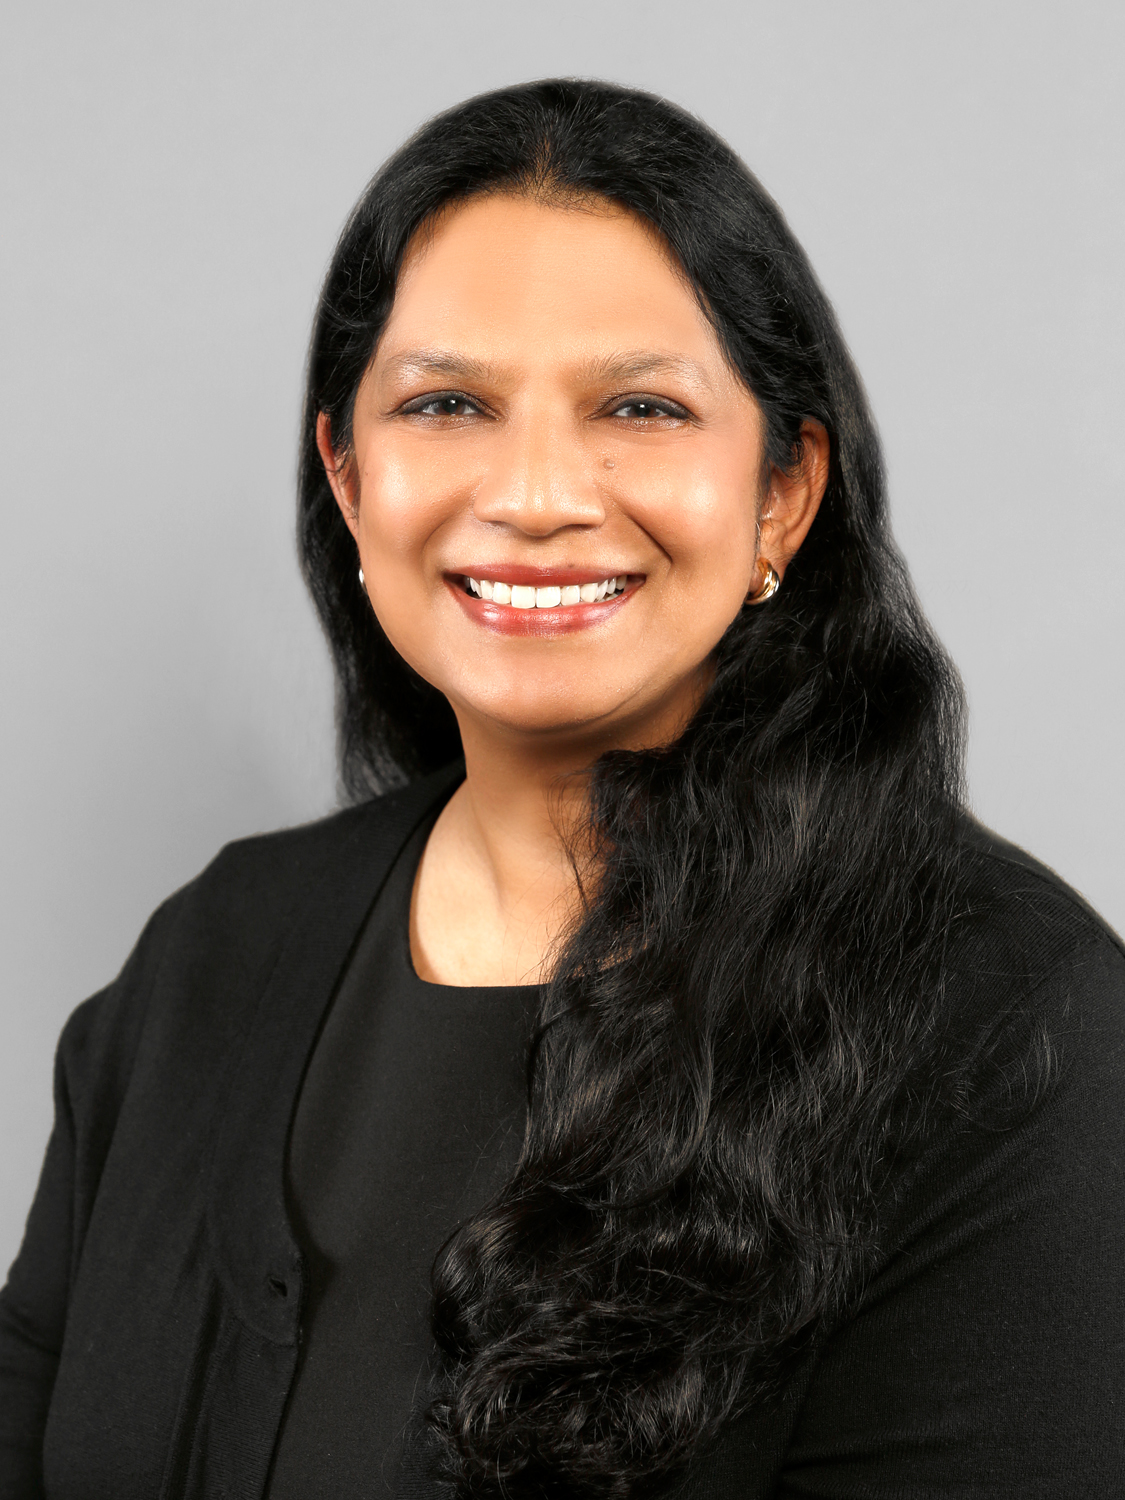 Photo of Seema Bakhru, M.D. from CT Breast Imaging